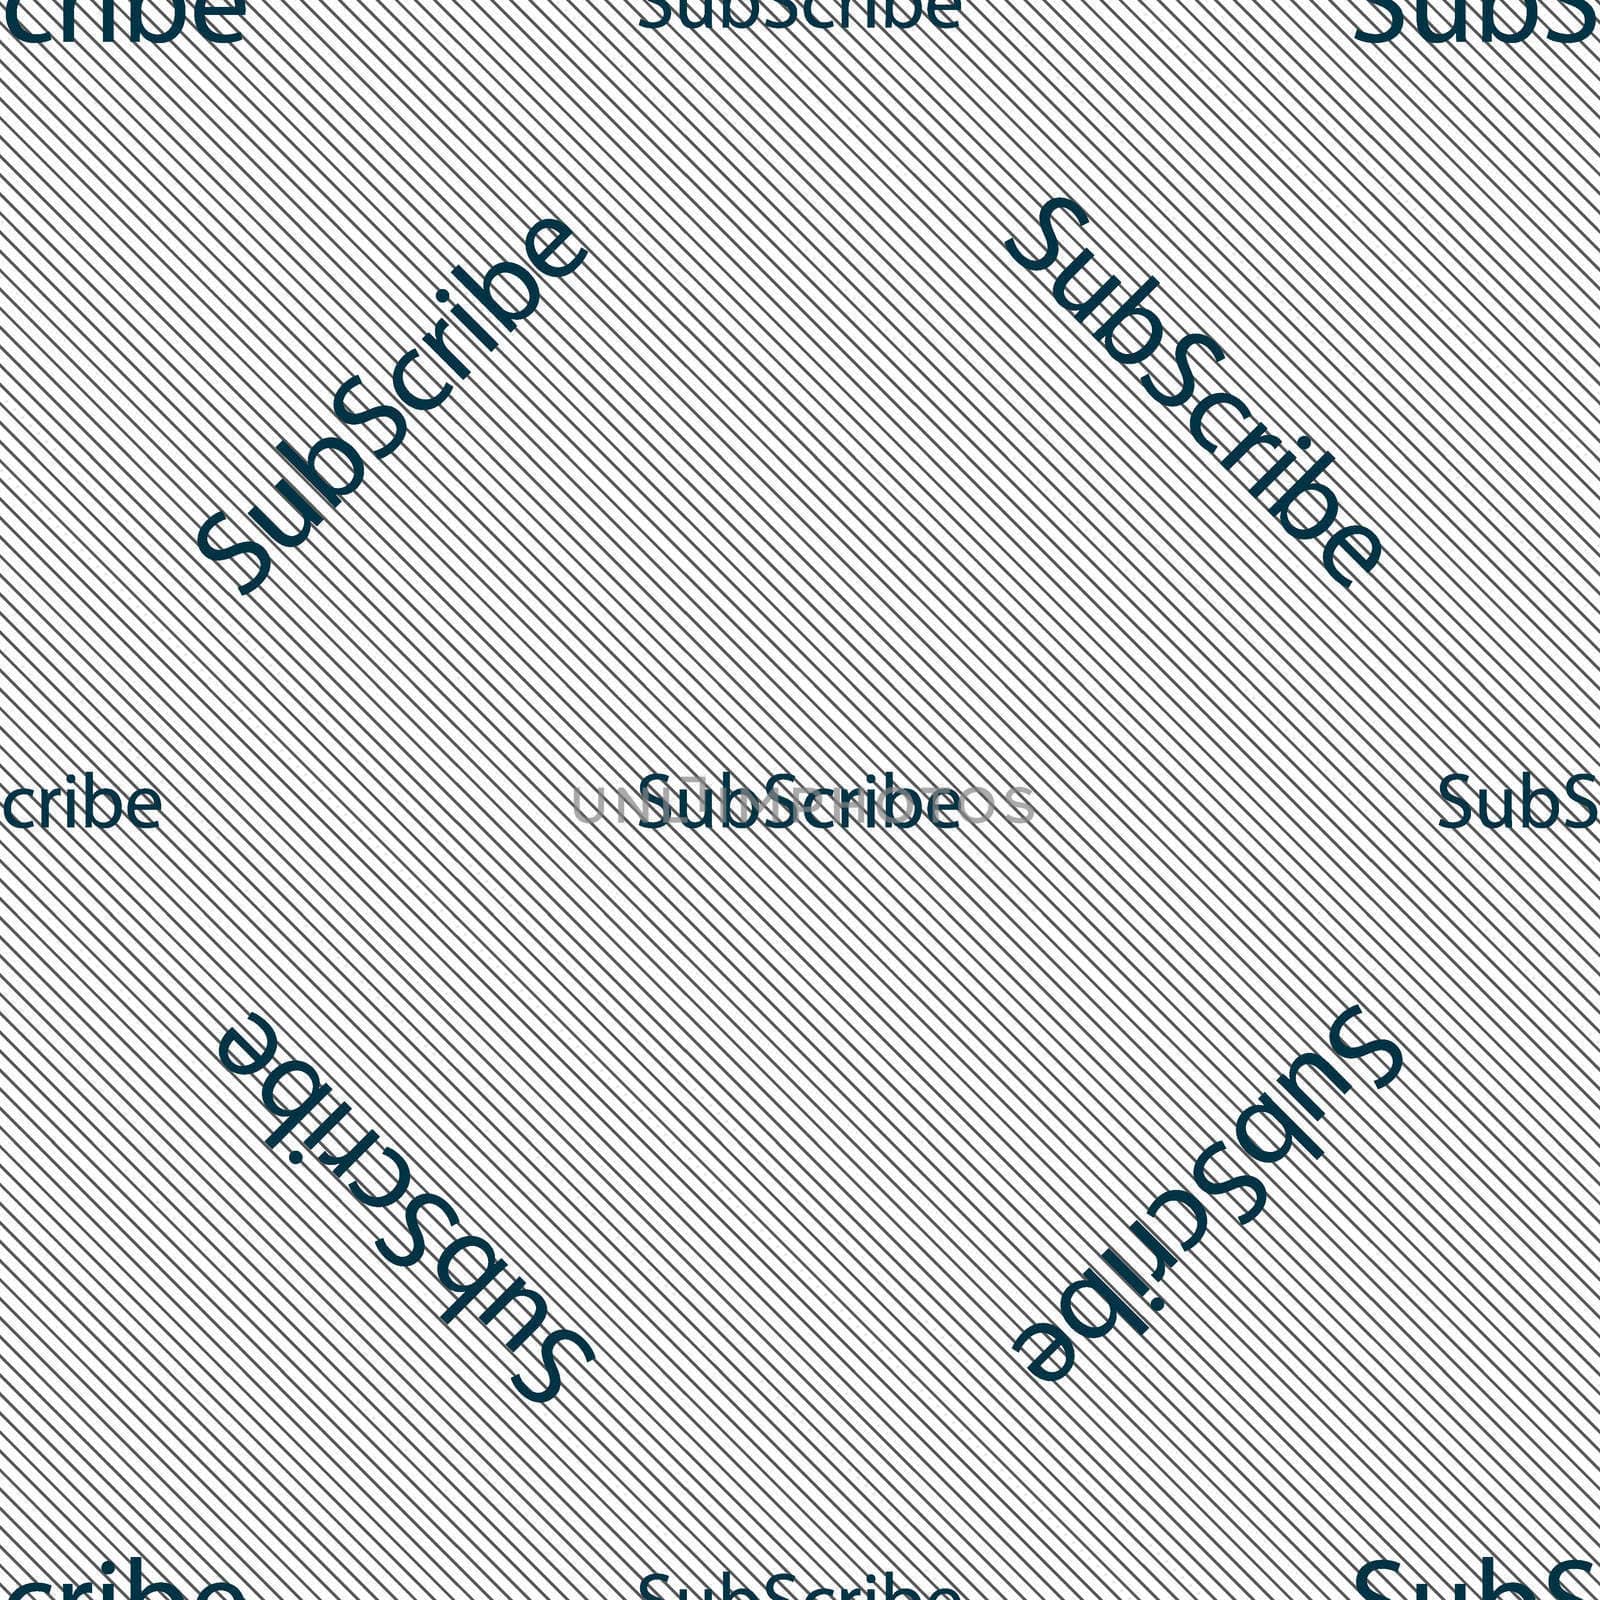 Subscribe sign icon. Membership symbol. Website navigation. Seamless pattern with geometric texture.  by serhii_lohvyniuk